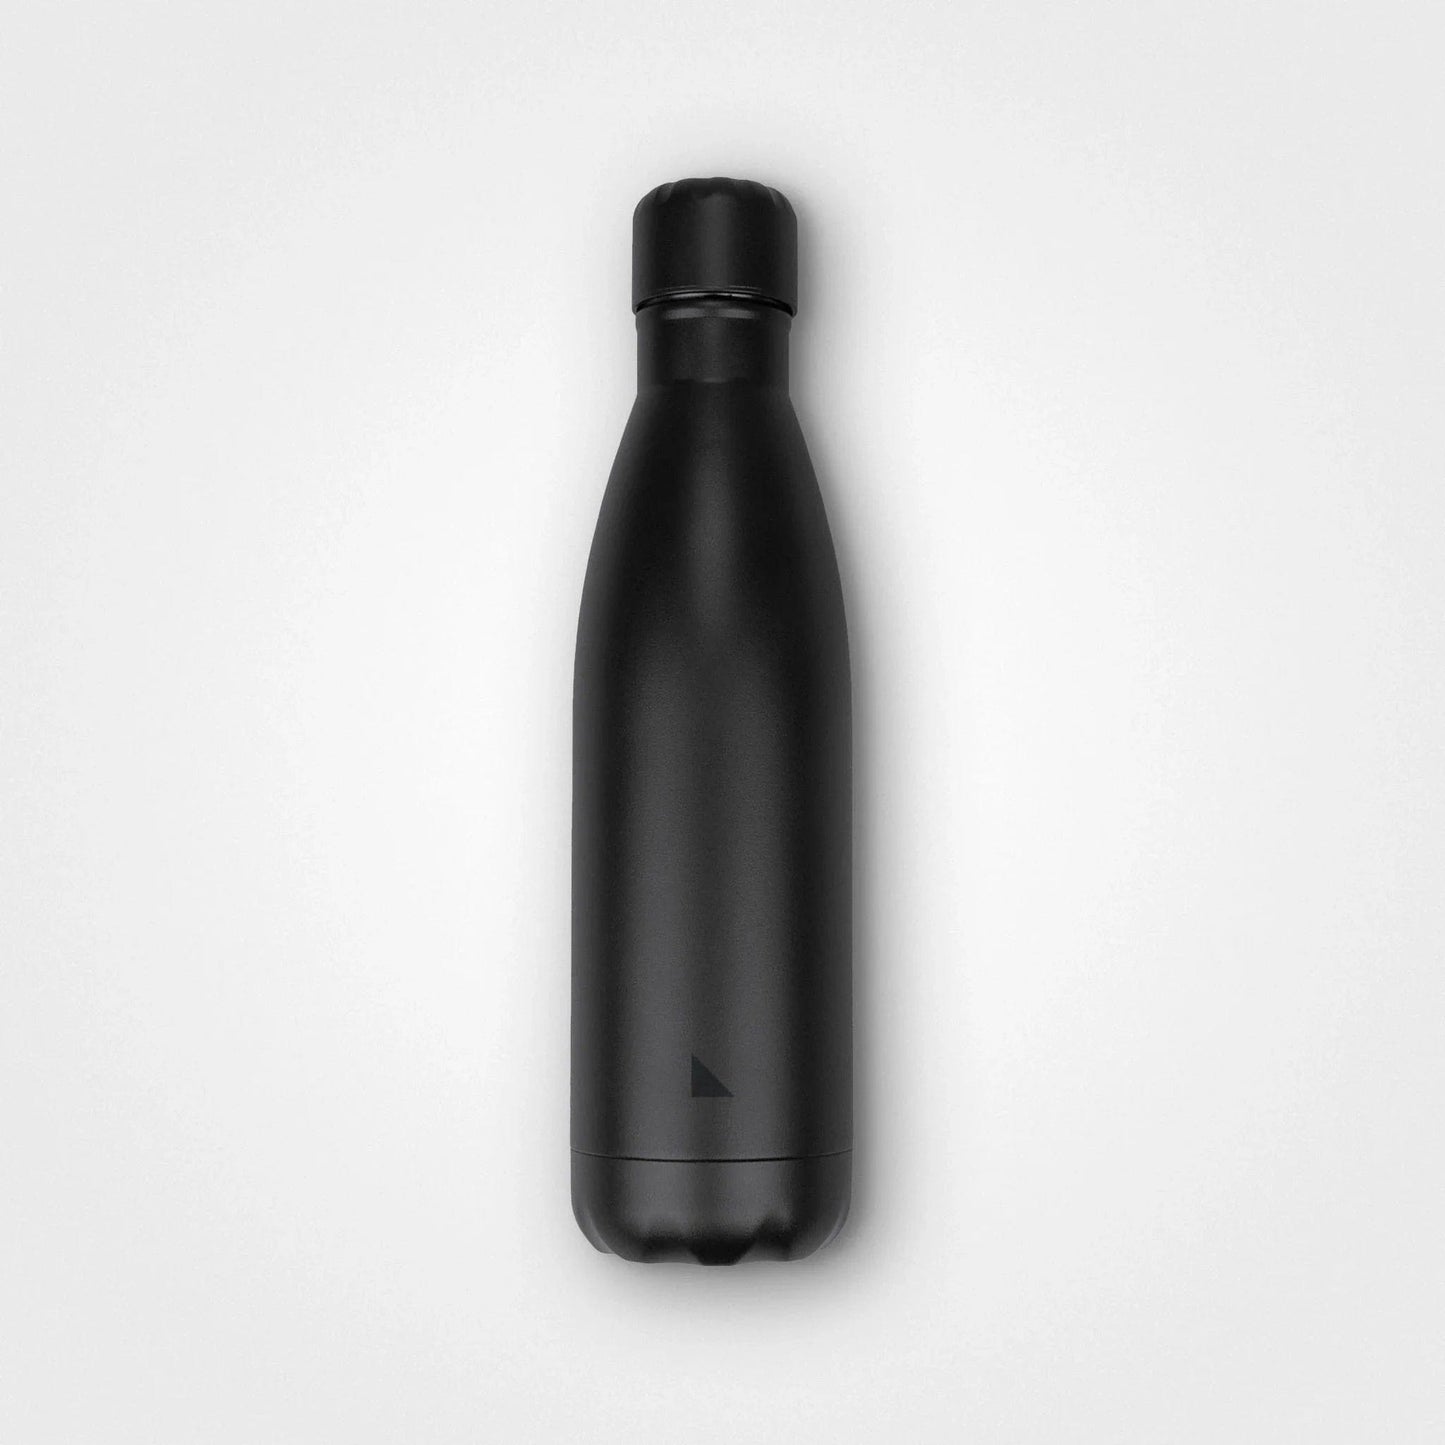  Thermosflasche aus recyceltem Stahl, Charcoal Black